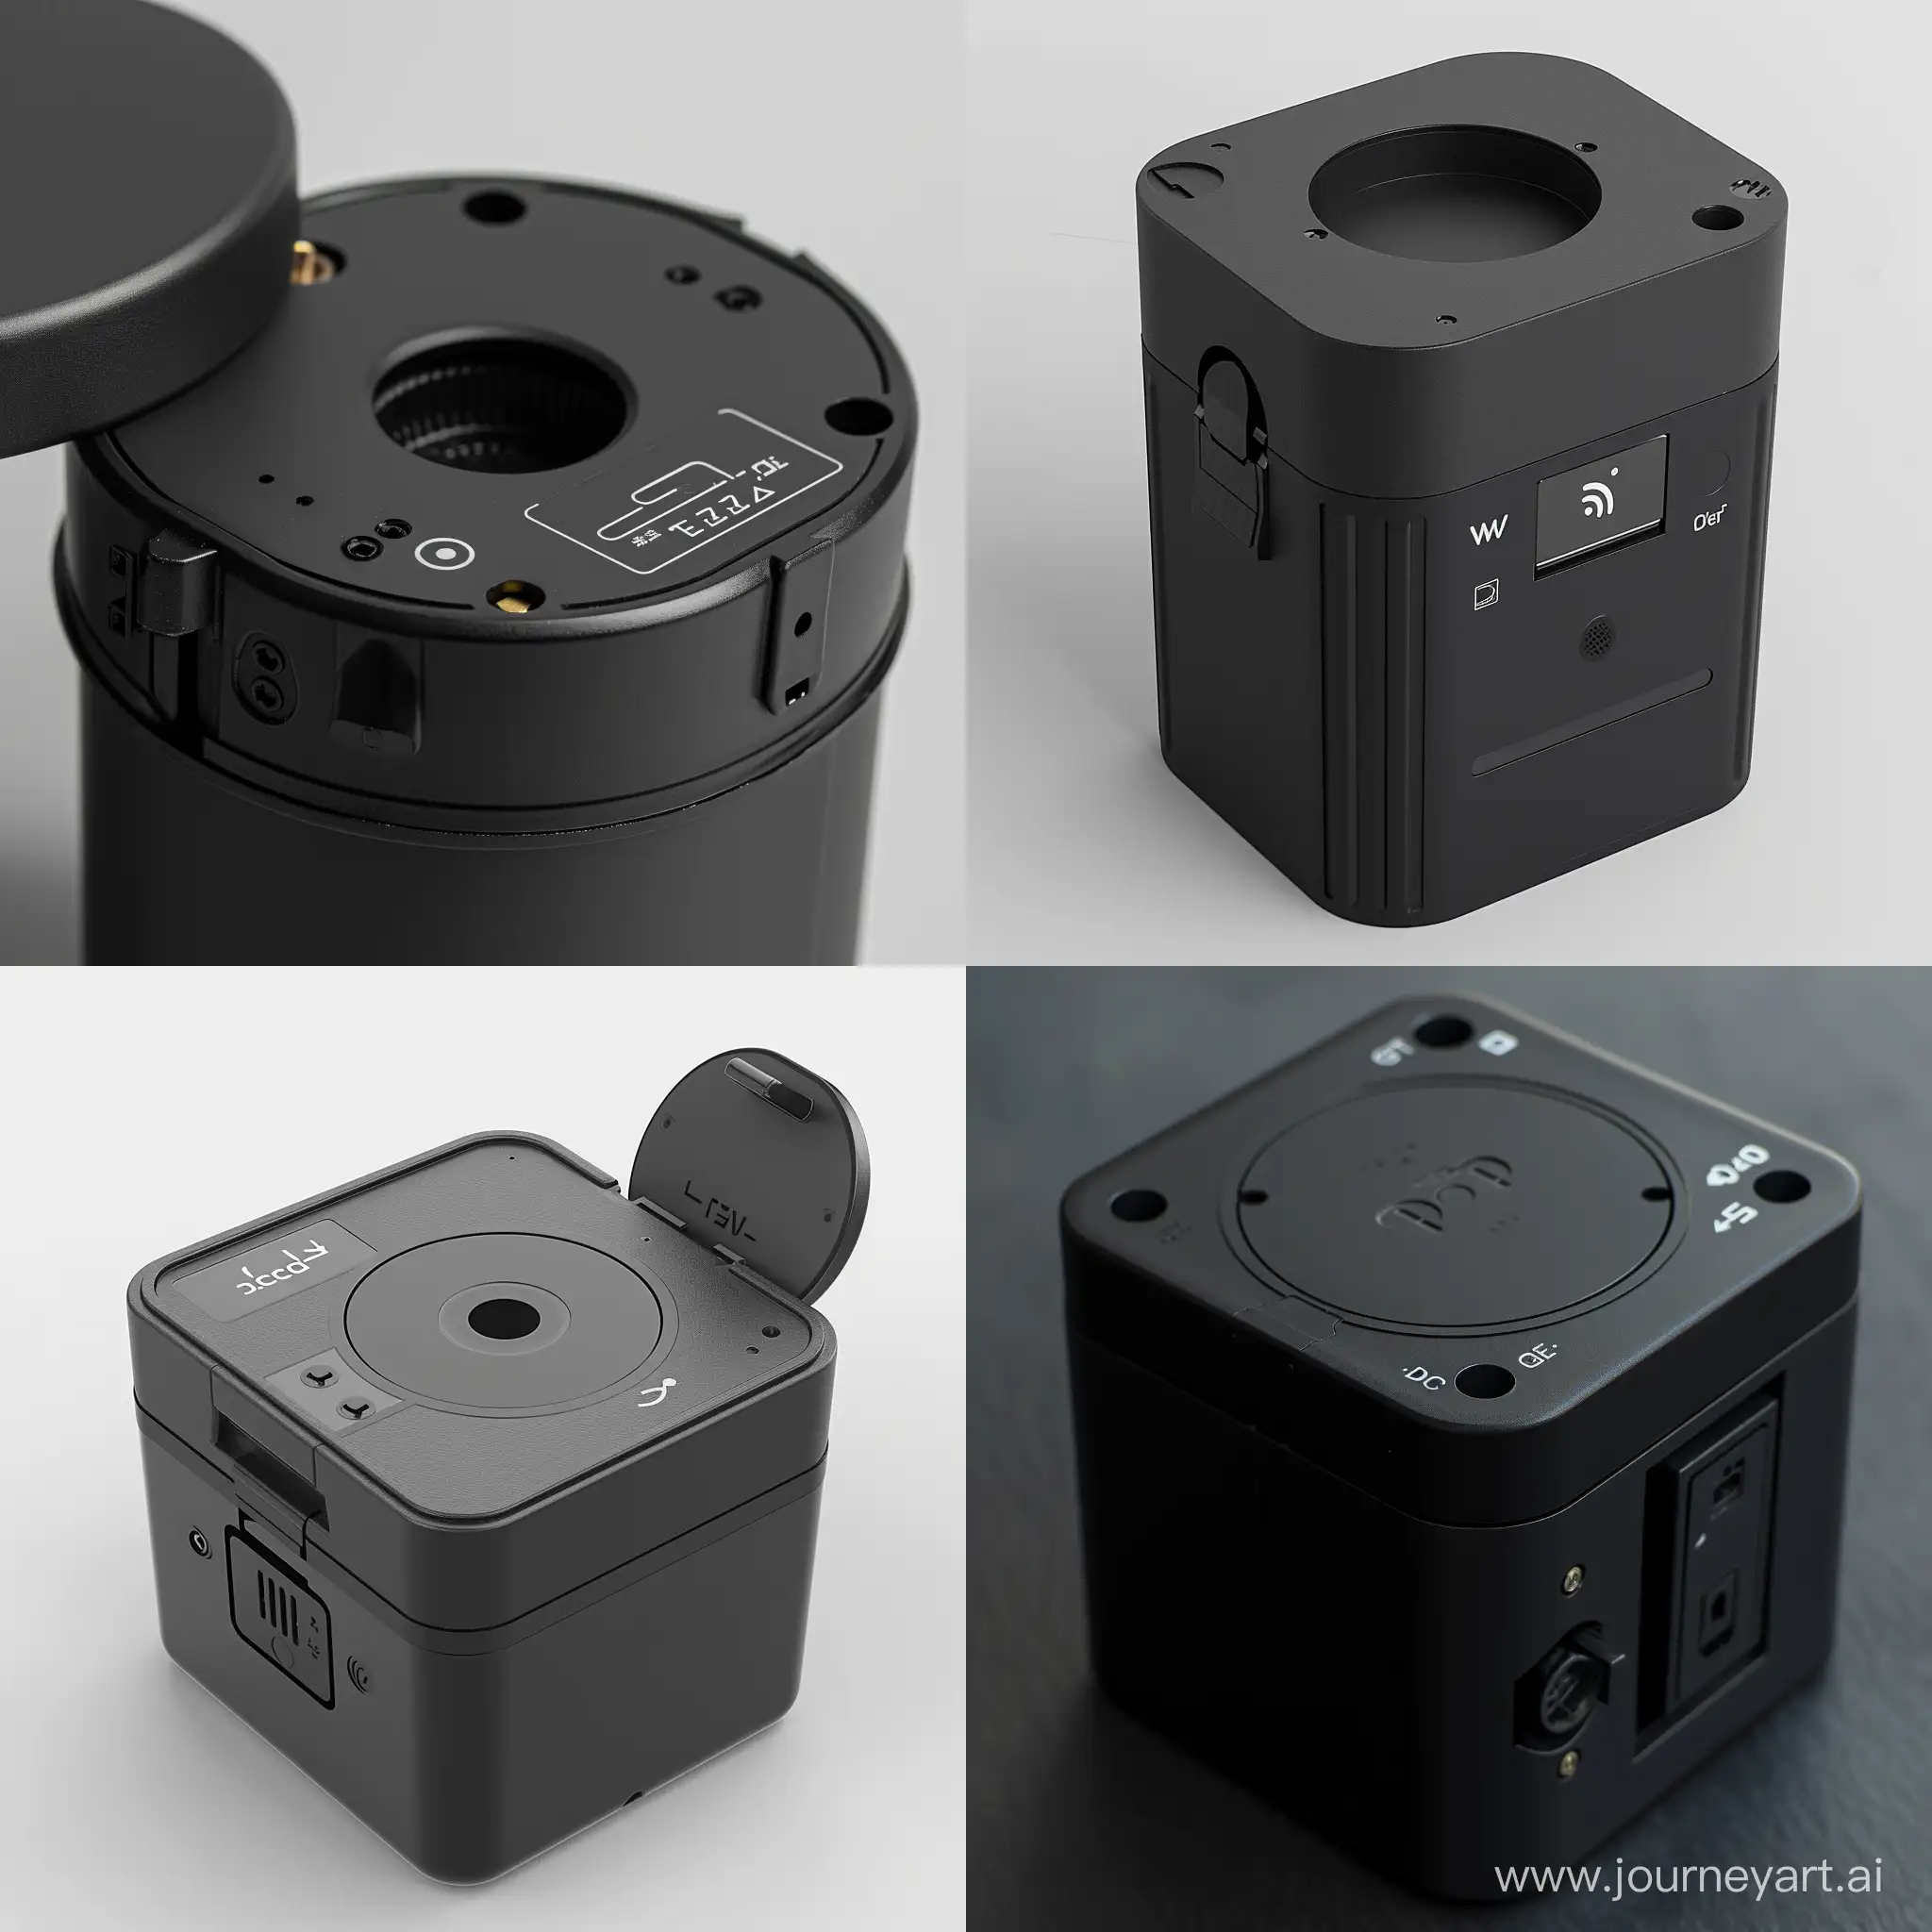 Black container box, the top side can be opened like a lid, a a small circular hole in the middle of the top side, on the side is a push button,beside the button is a on/off switch, from the hole you can see a ESP-32.